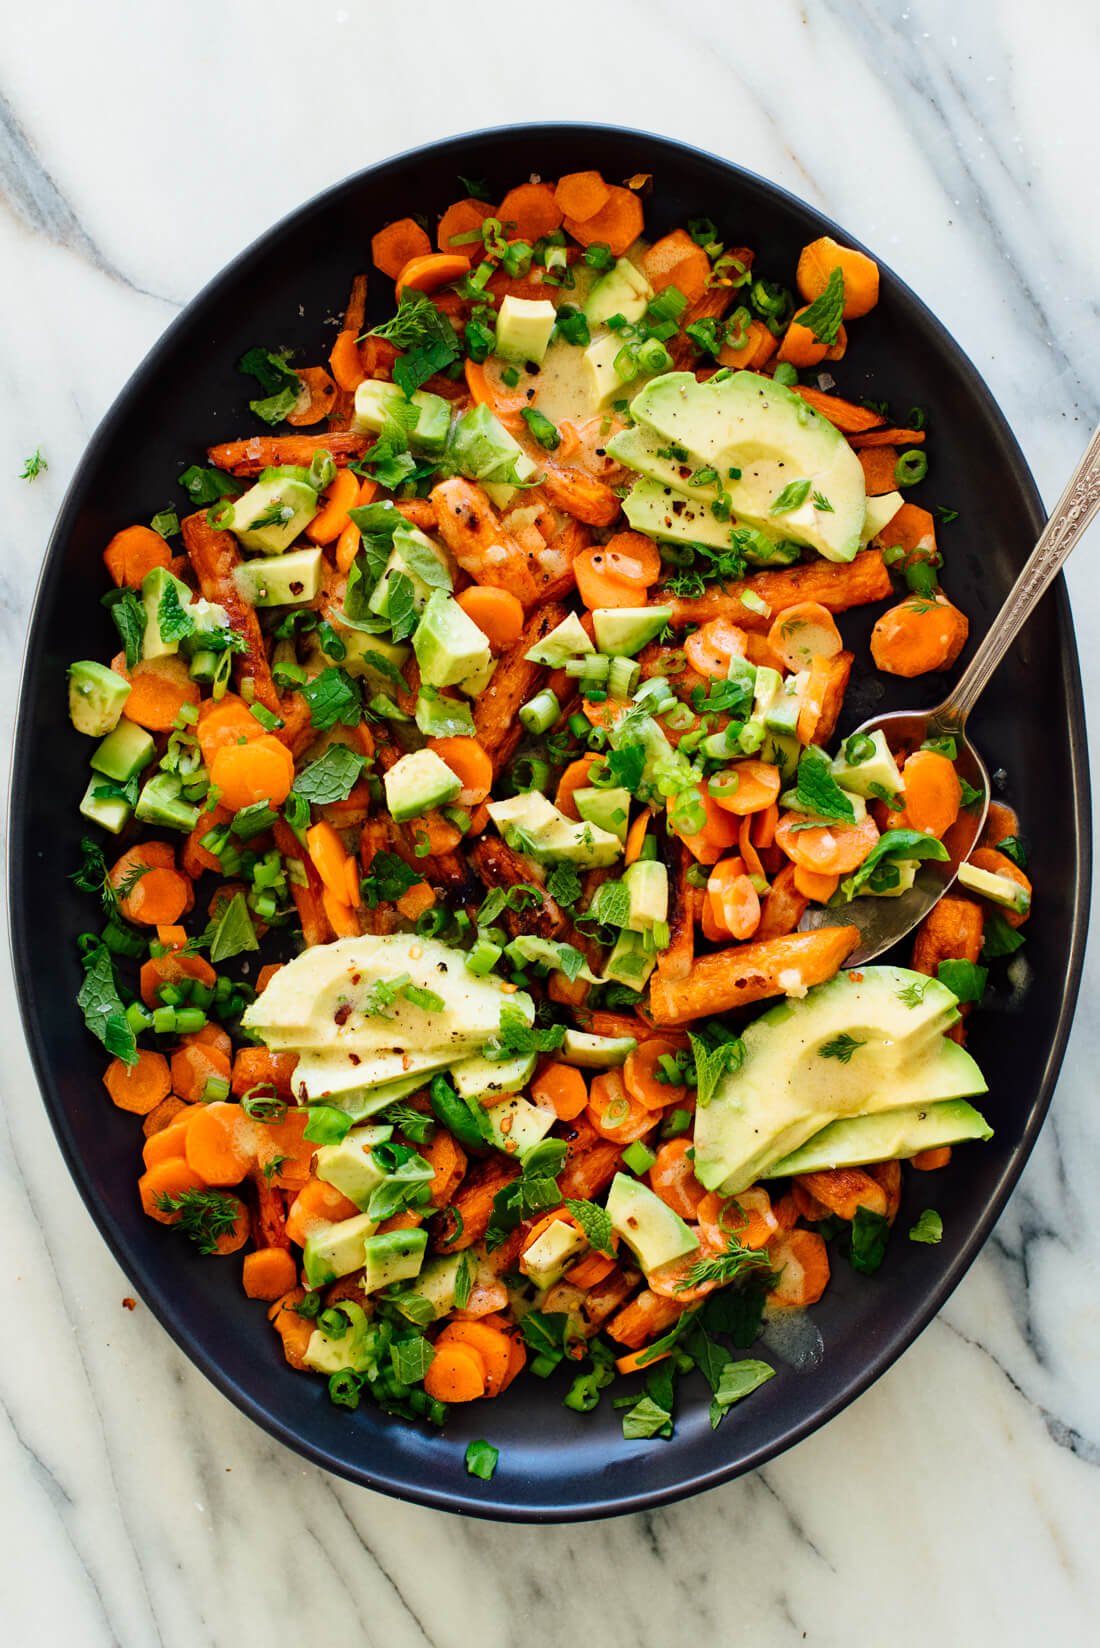 Roasted and raw carrot salad with avocado recipe